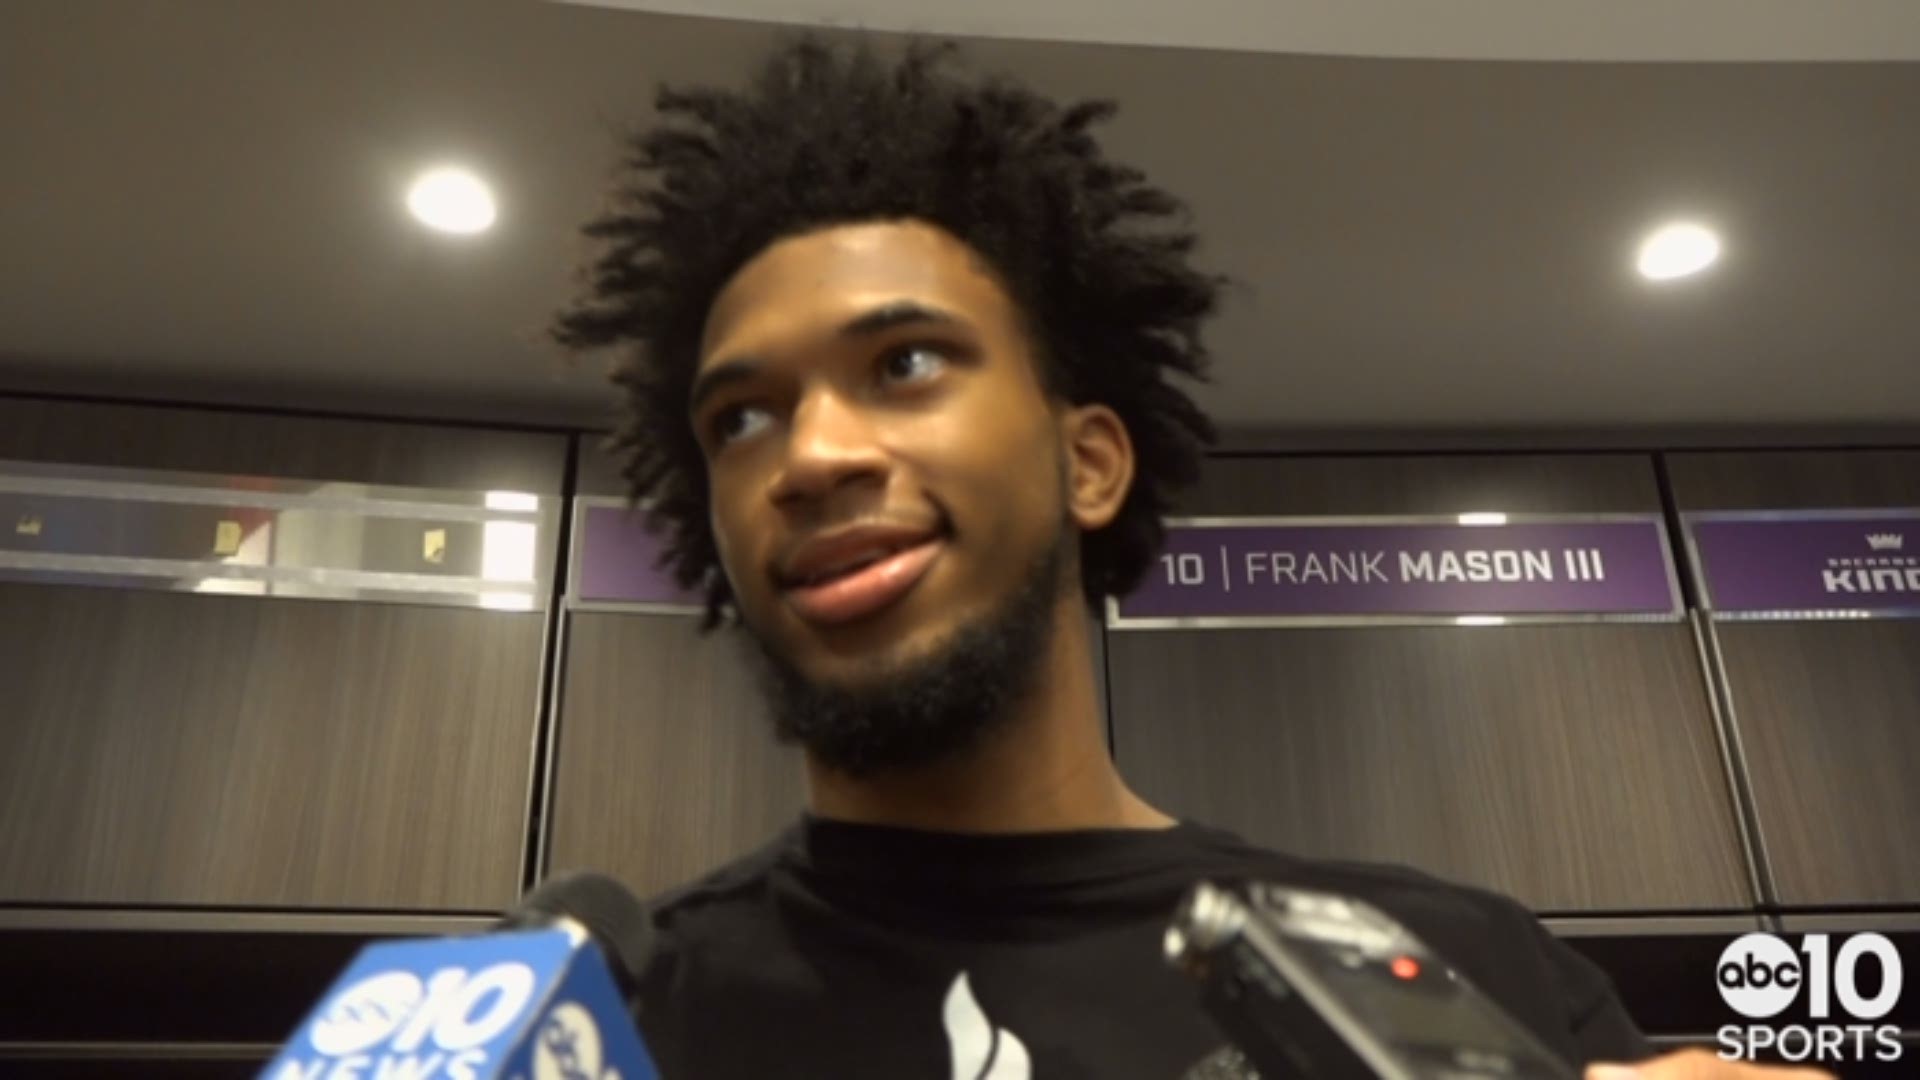 Kings rookie center Marvin Bagley III talks about his team looking to put Thursday's 132-93 preseason loss to the Utah Jazz behind them as they head to Portland to face the Trail Blazers on Friday.